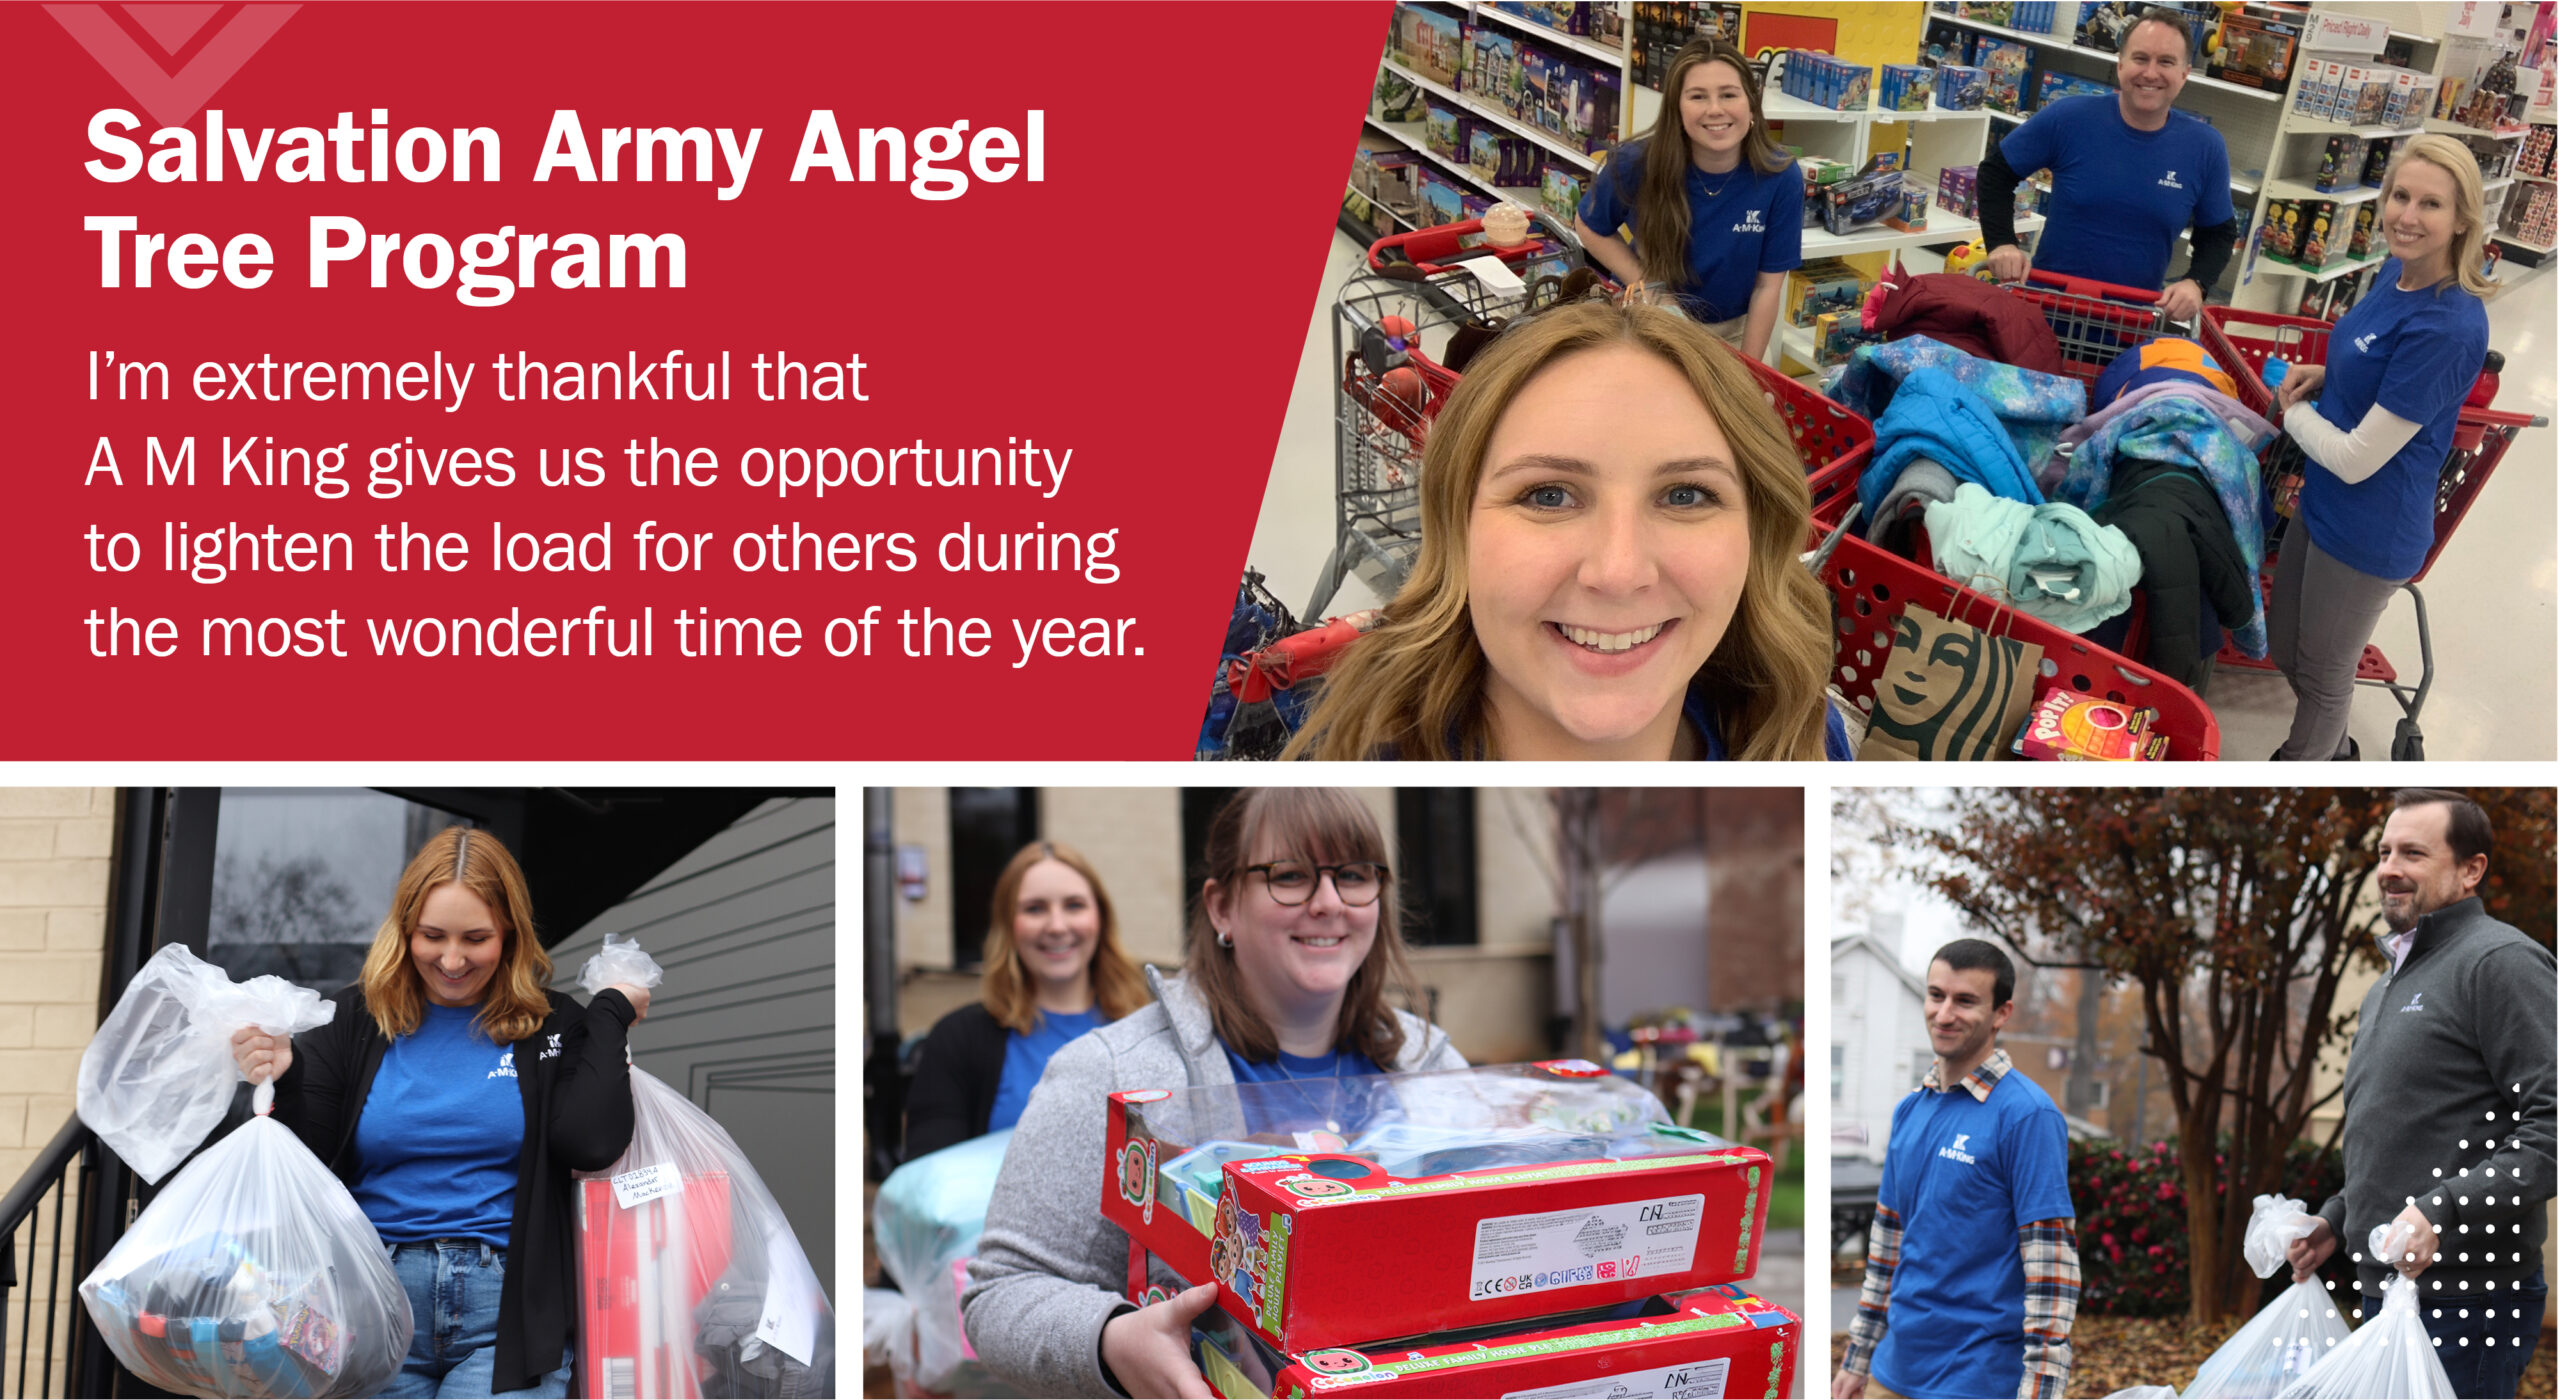 Community Engagement: A M King has participated in the Salvation Army's Angel Tree program for 15 years.